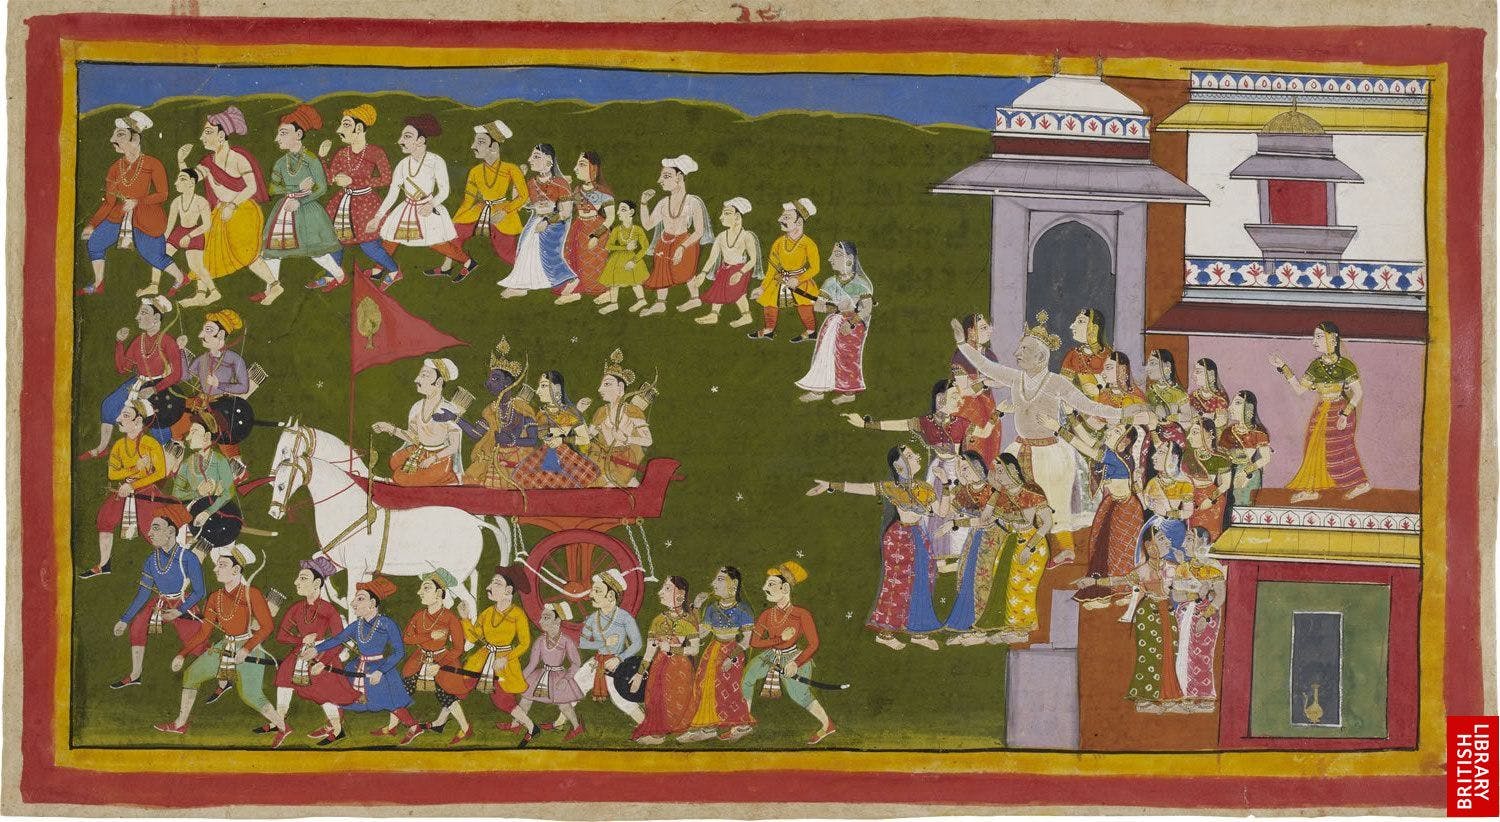 Rama leaving for fourteen years of exile from Ayodhya, painting from 17th century